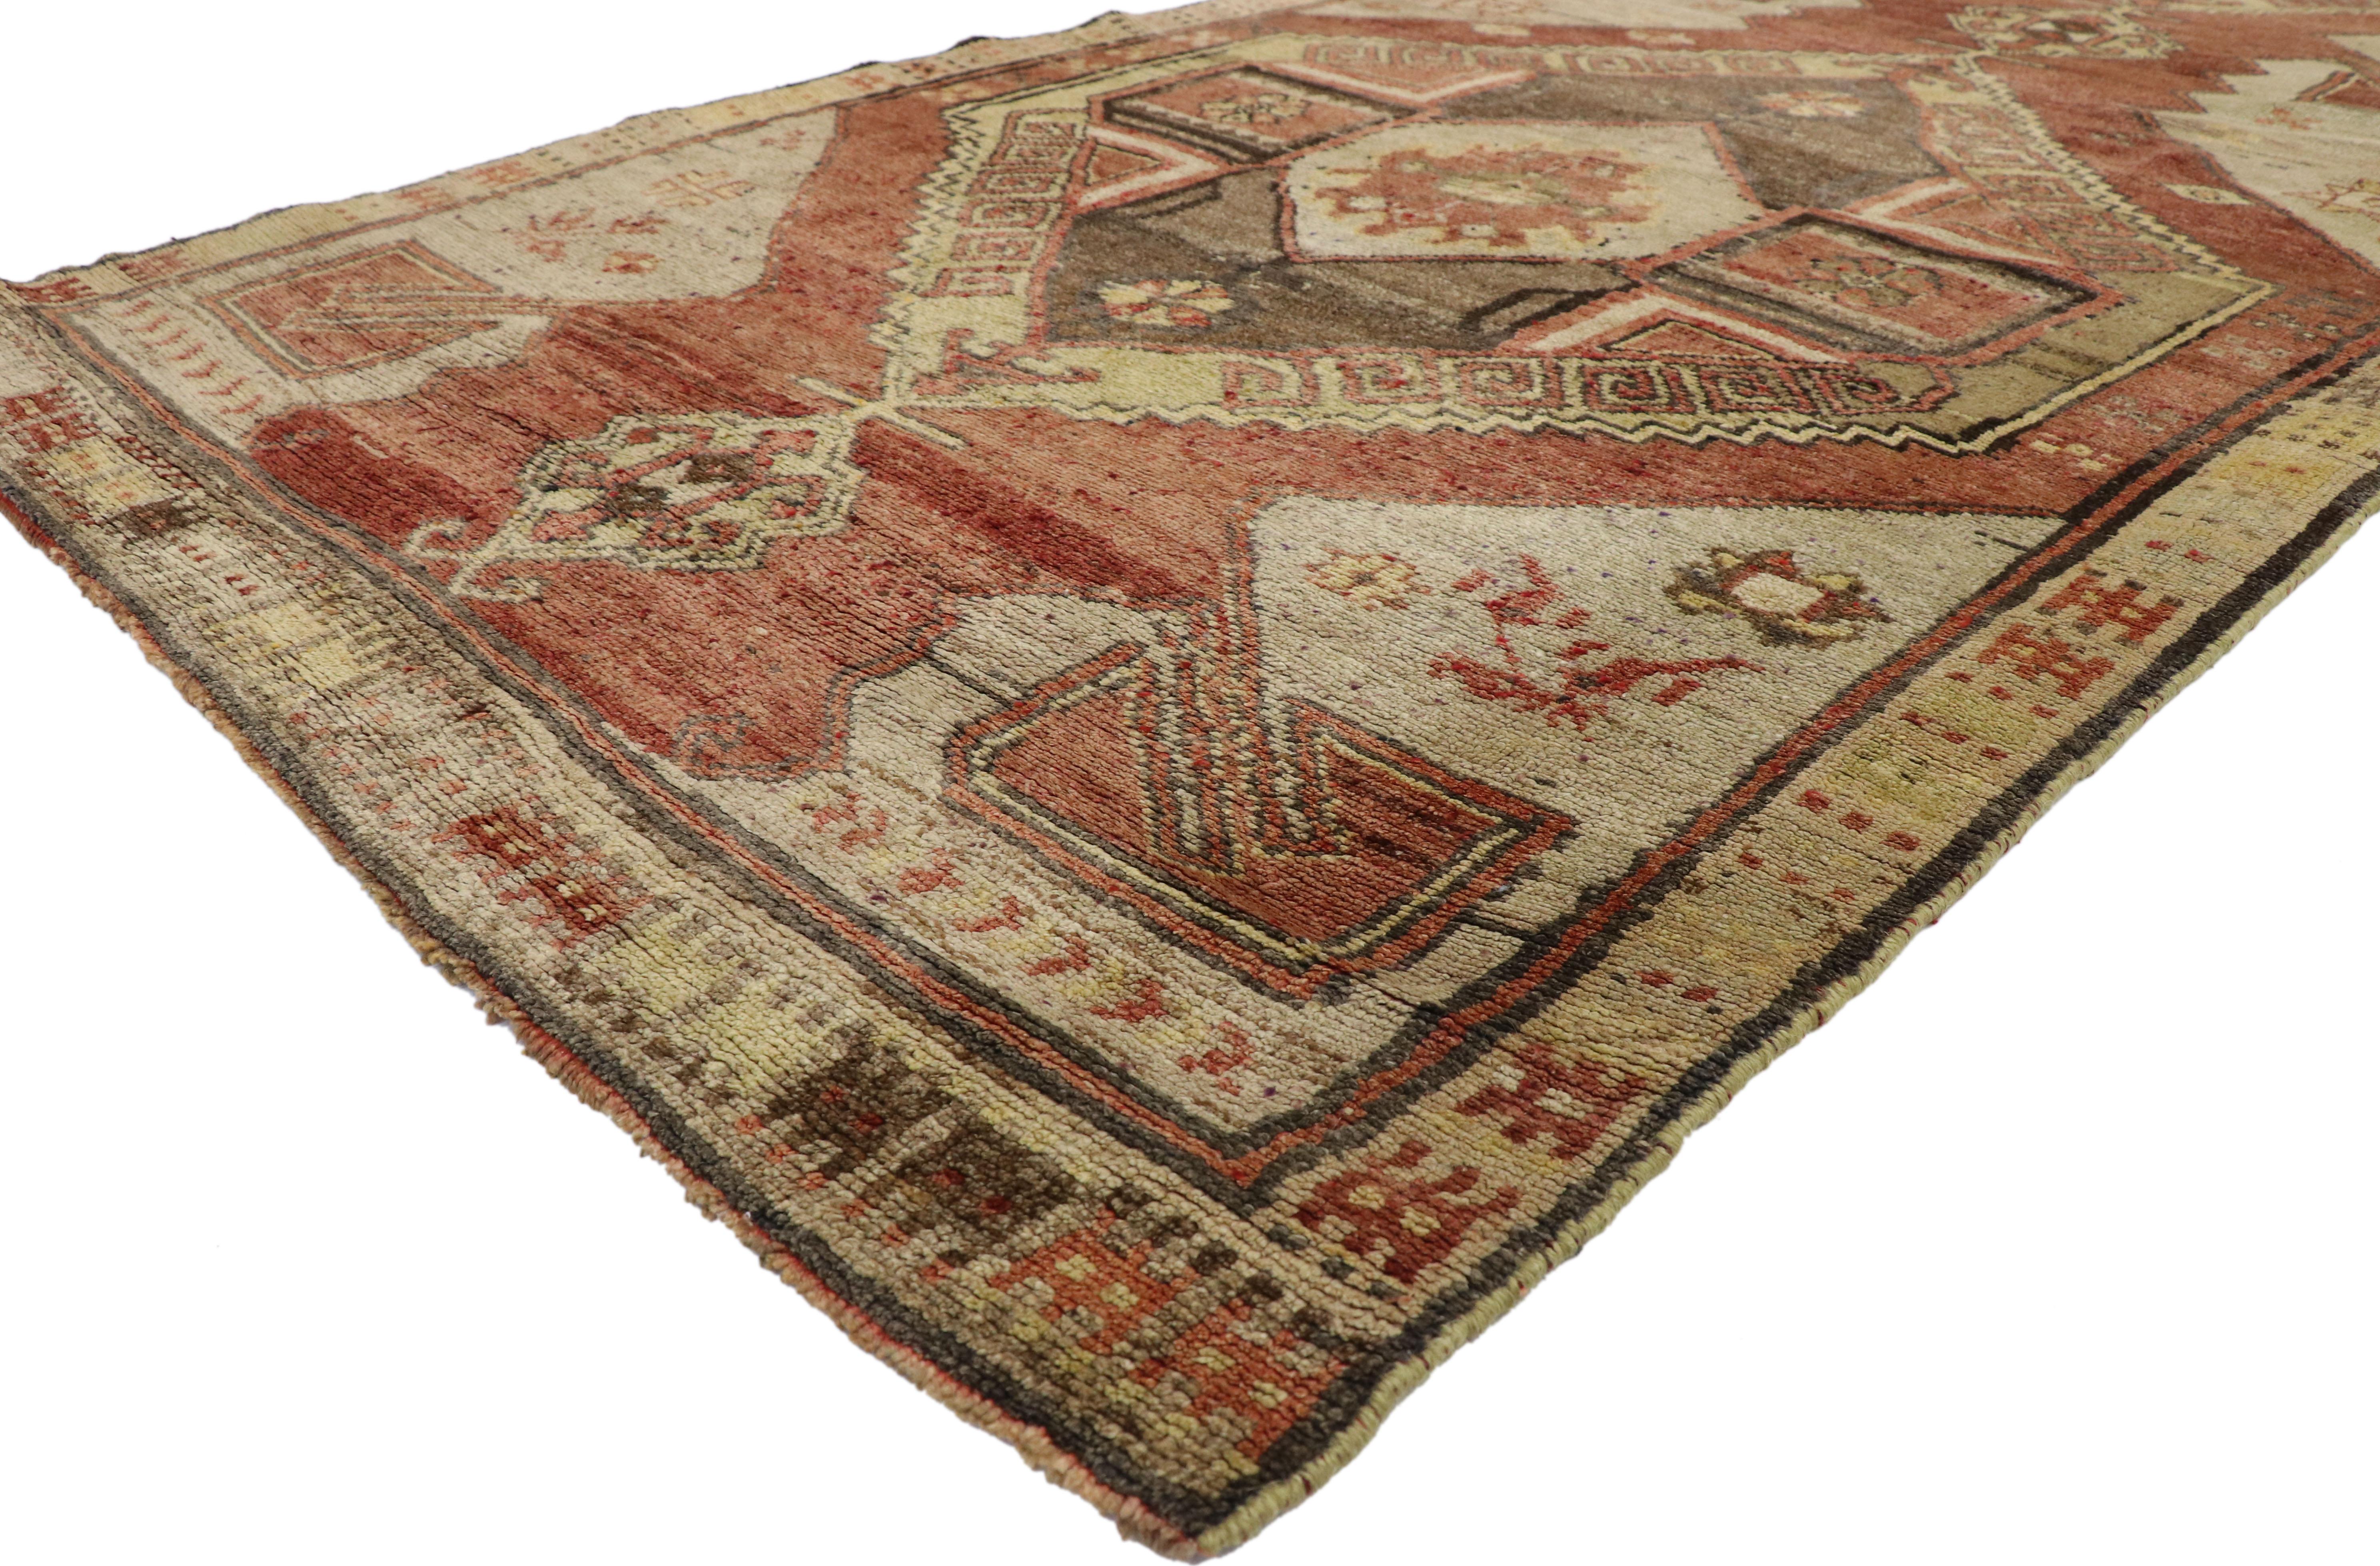 50644-50645 Pair of Vintage Turkish Oushak Runners with Mid-Century Modern Style. This pair of rare vintage runners from Turkey are keeping up nicely with the times. They are a beautiful example of hues in harmony featuring a Mid-Century Modern